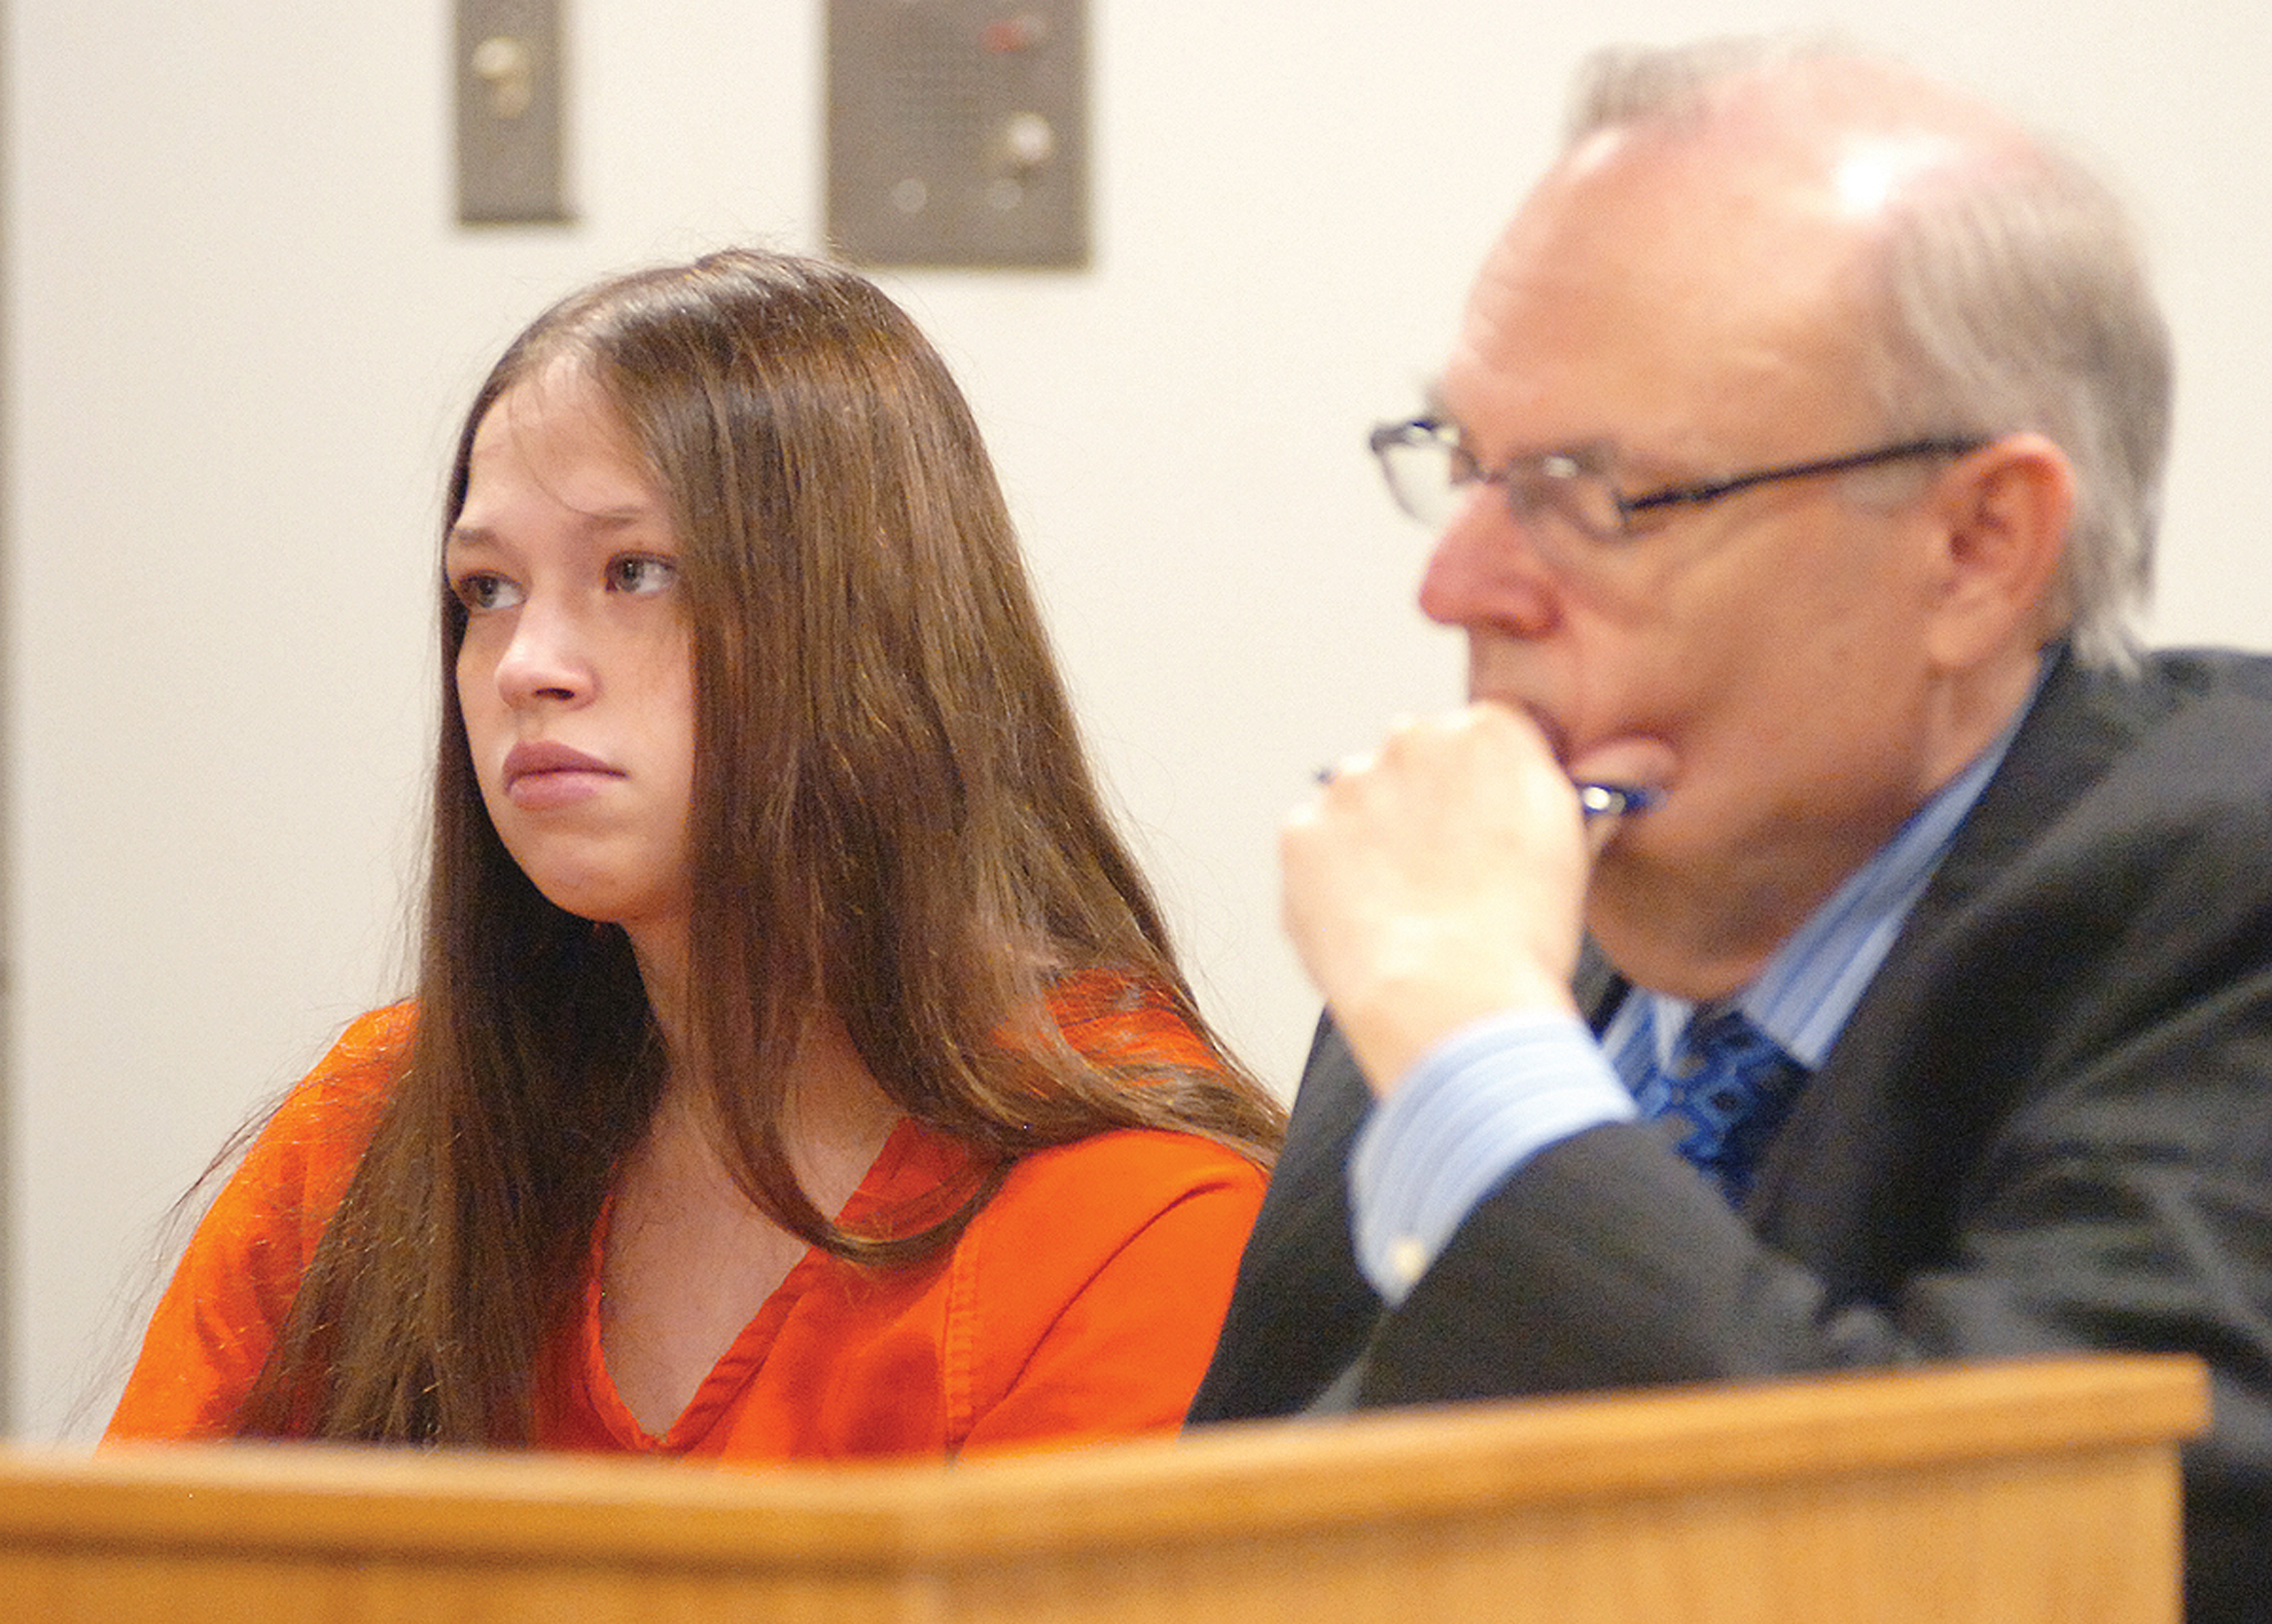 Brittany Pilkington appears for arraignment on three capital murder charges with her attorney Marc S. Triplett in Logan County Common Pleas Court in Bellefontaine, Ohio, on Aug. 26, 2015. Pilkington is charged with suffocating her three sons over a 13-month period. (Joel E. Mast—Bellefontaine Examine/AP)